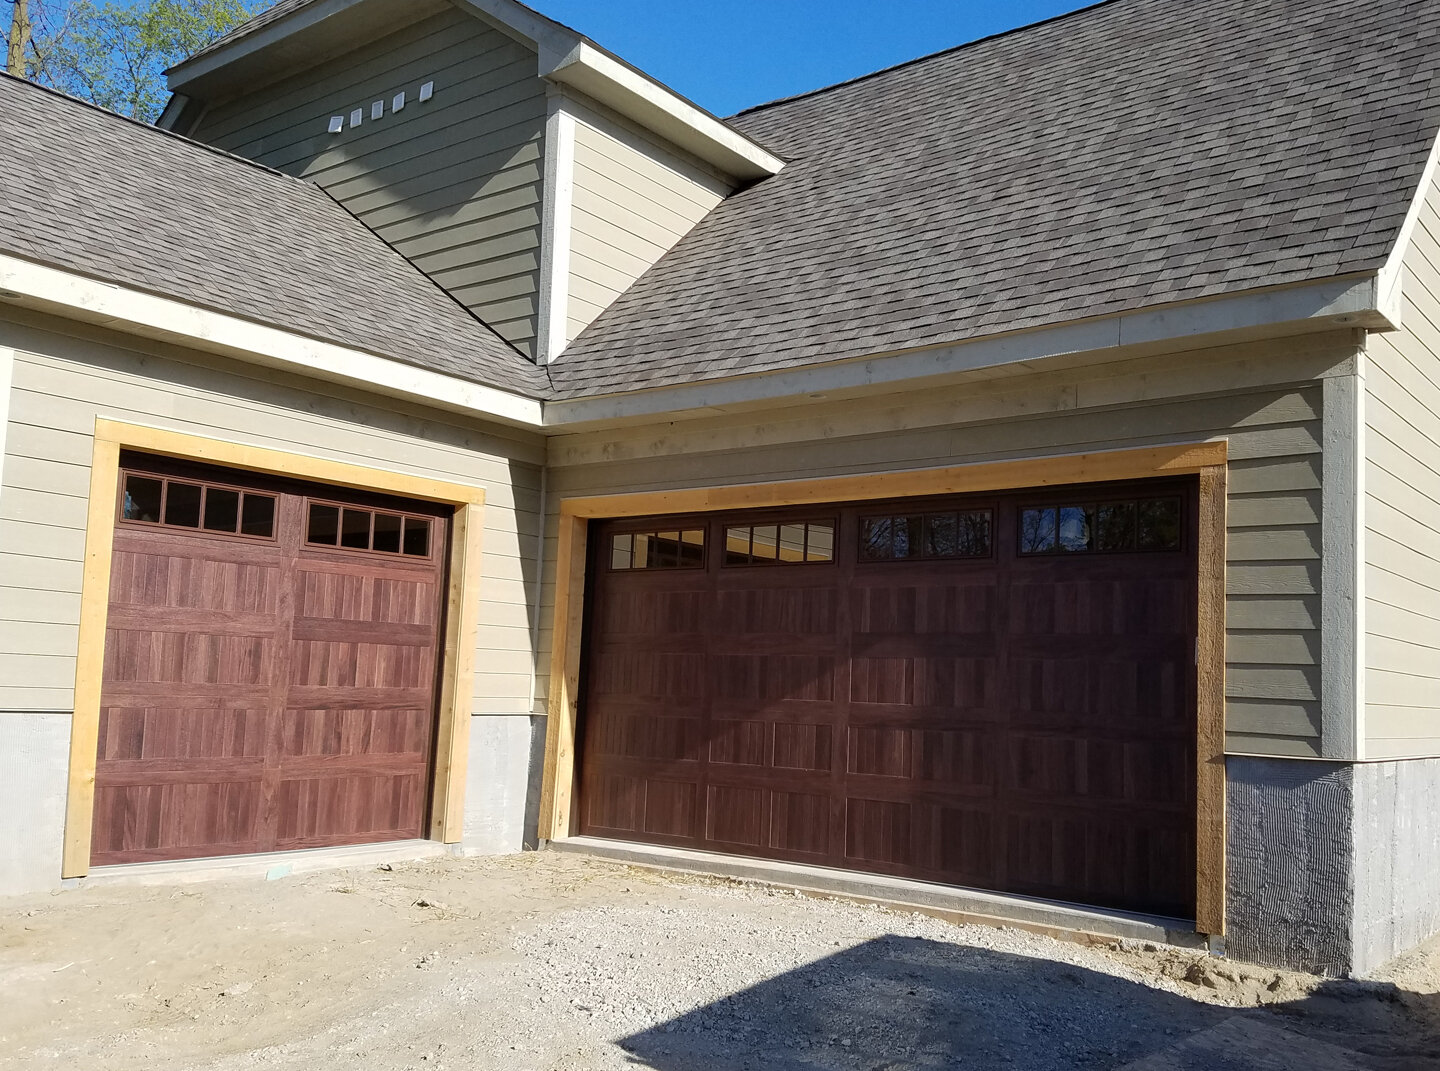 Clinton Twp. and Chesterfield Michigan Garage Door Spring Replacement and New Installations